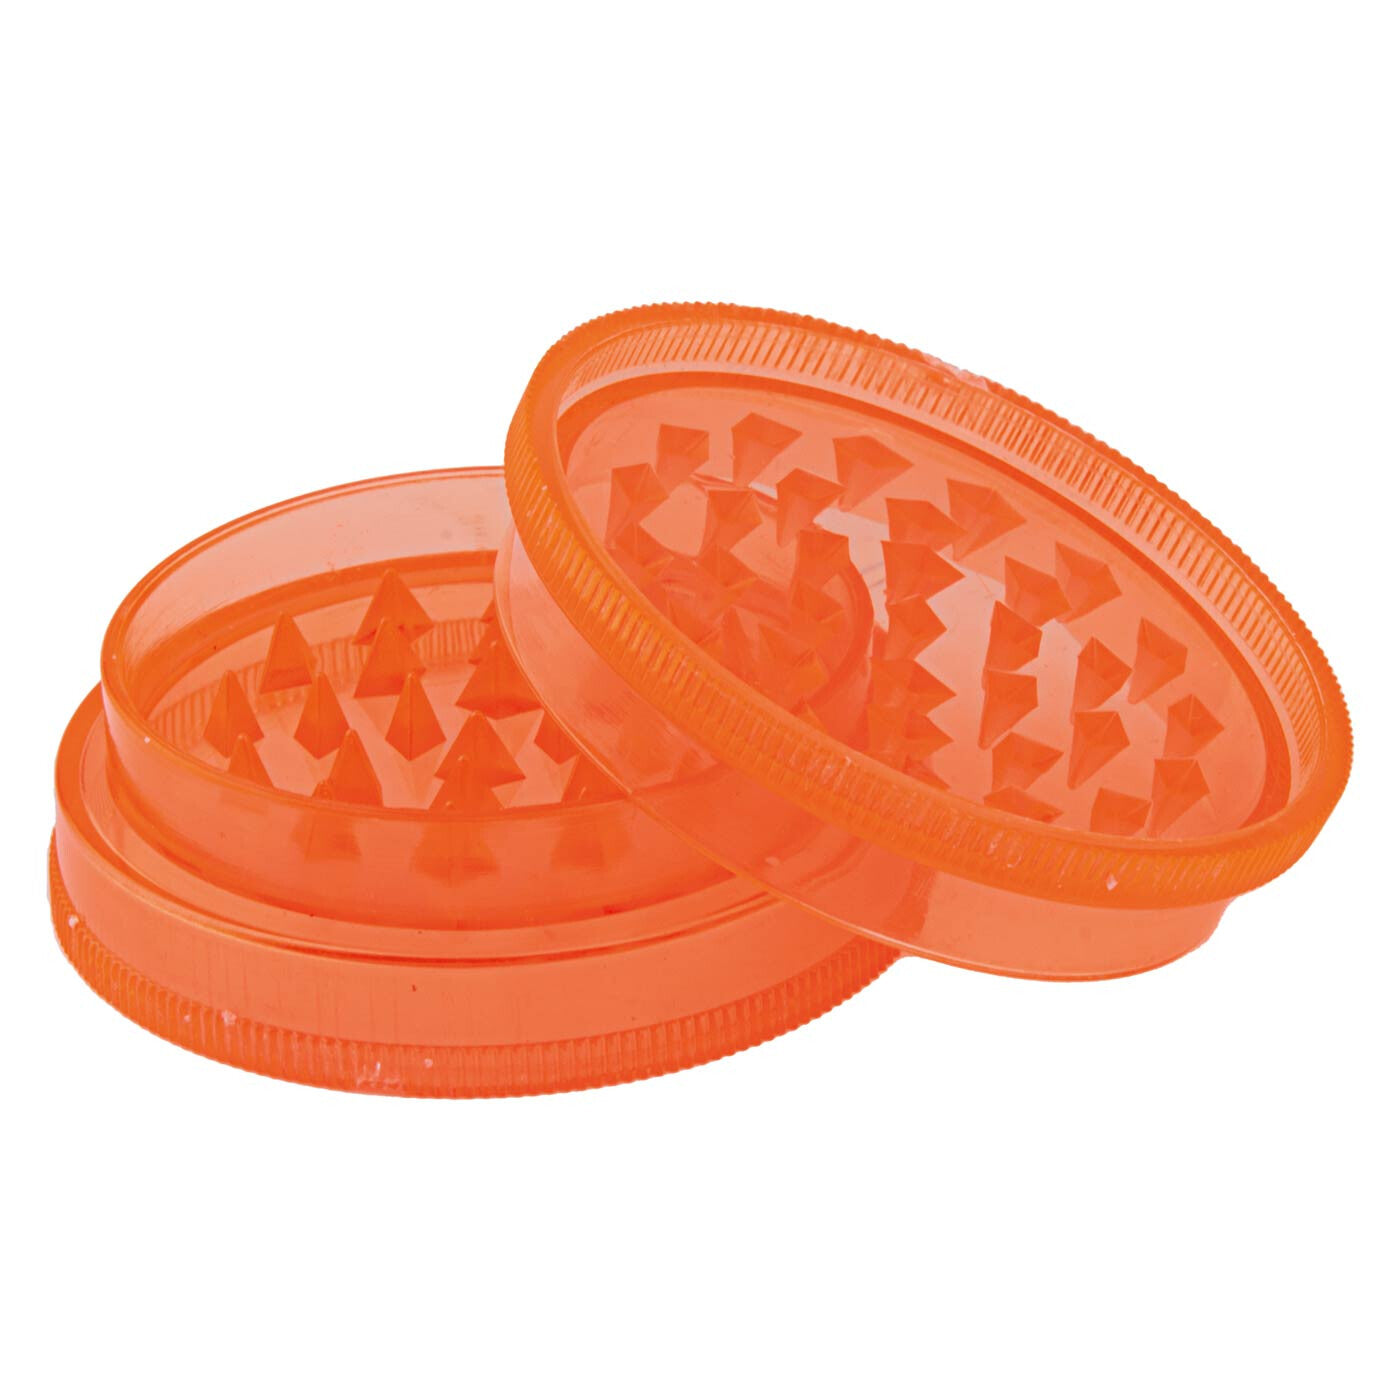 Acrylic Grinder With Stash Compartment Orange open